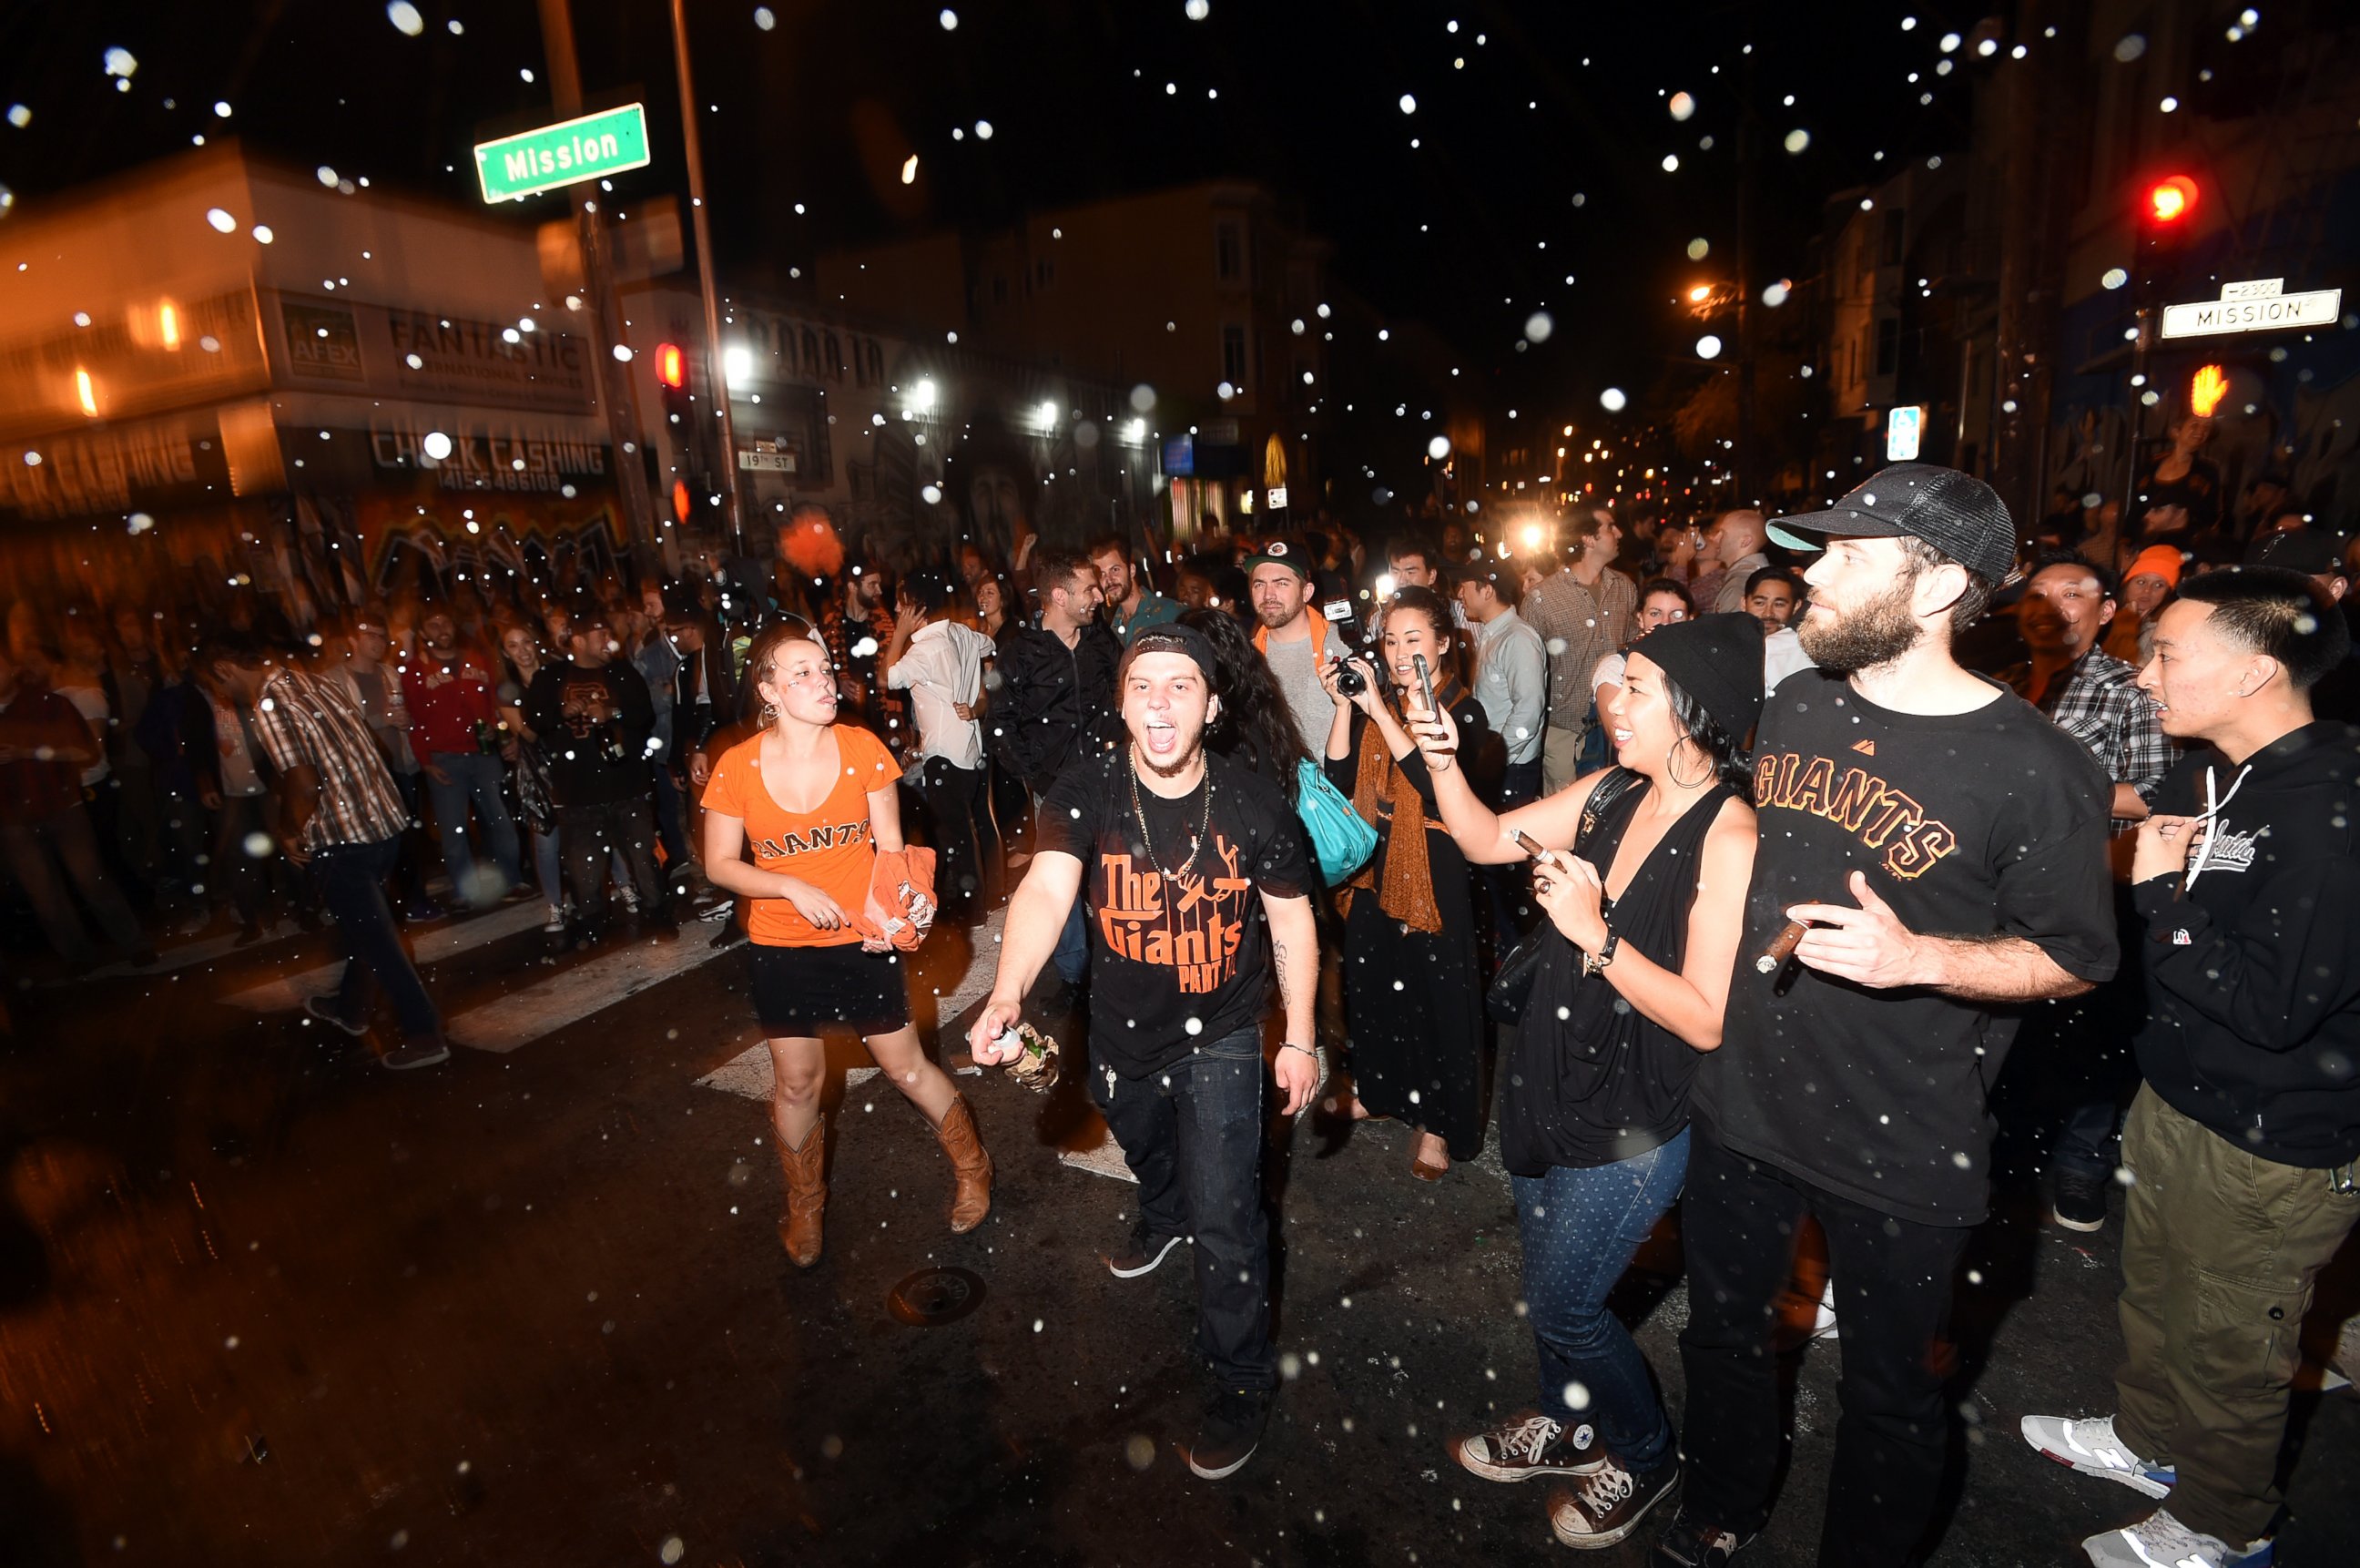 PHOTO: San Francisco Giants fans celebrate in the Mission district after the San Francisco Giants beat the Kansas City Royals to win the World Series on Oct. 29, 2014, in San Francisco. 